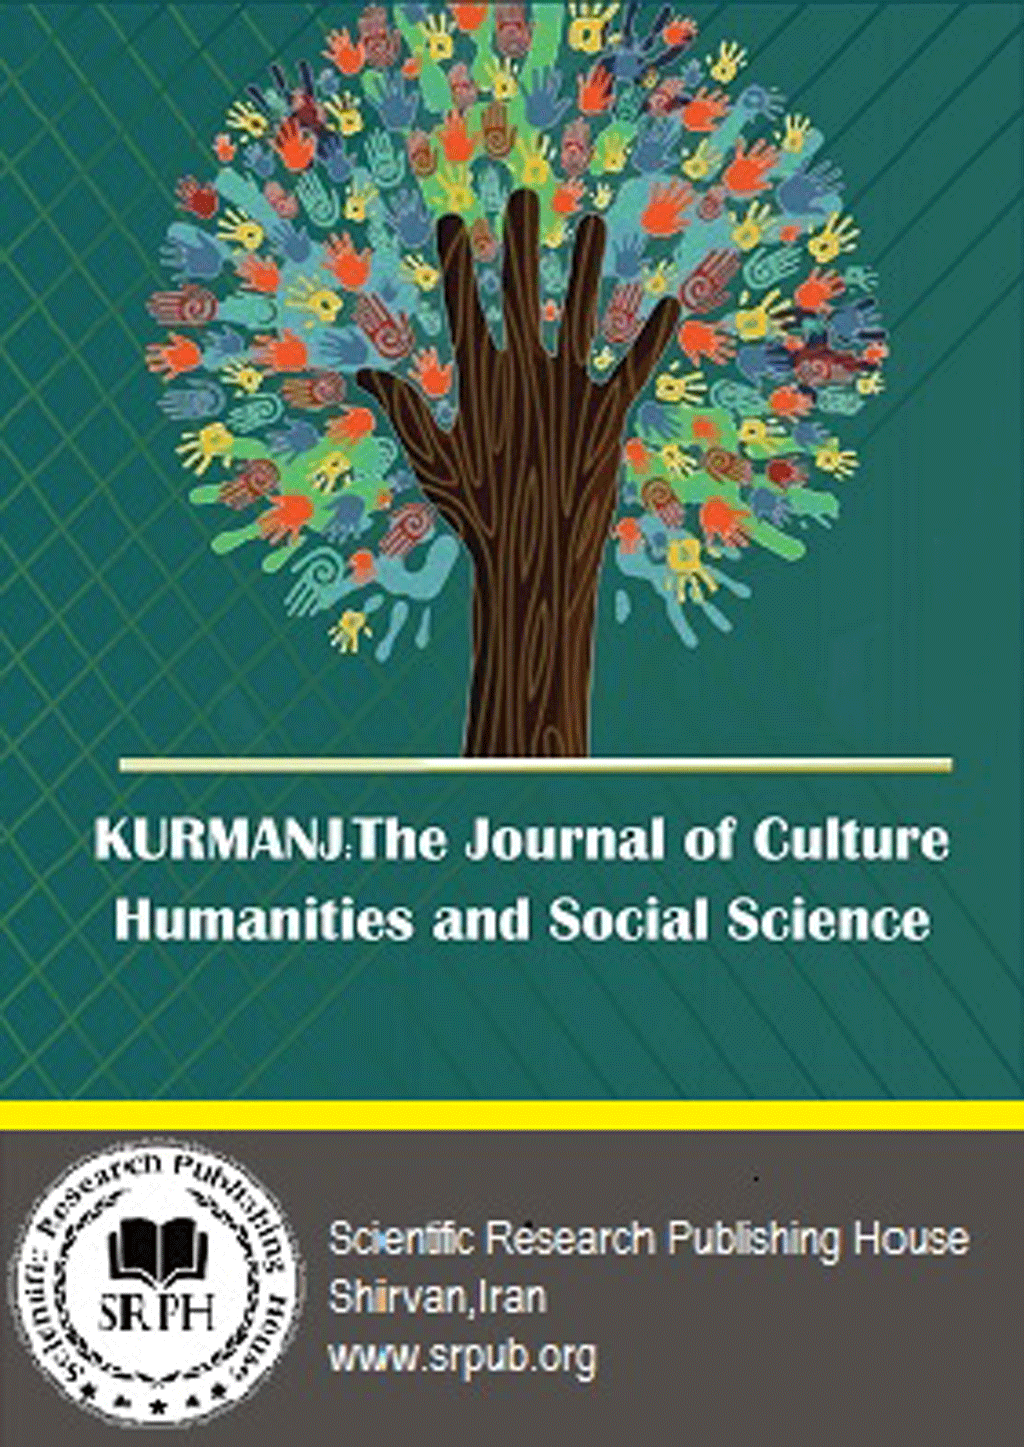 Culture, Humanities and Social Science - Winter 2019, Volume 1 - Number 1